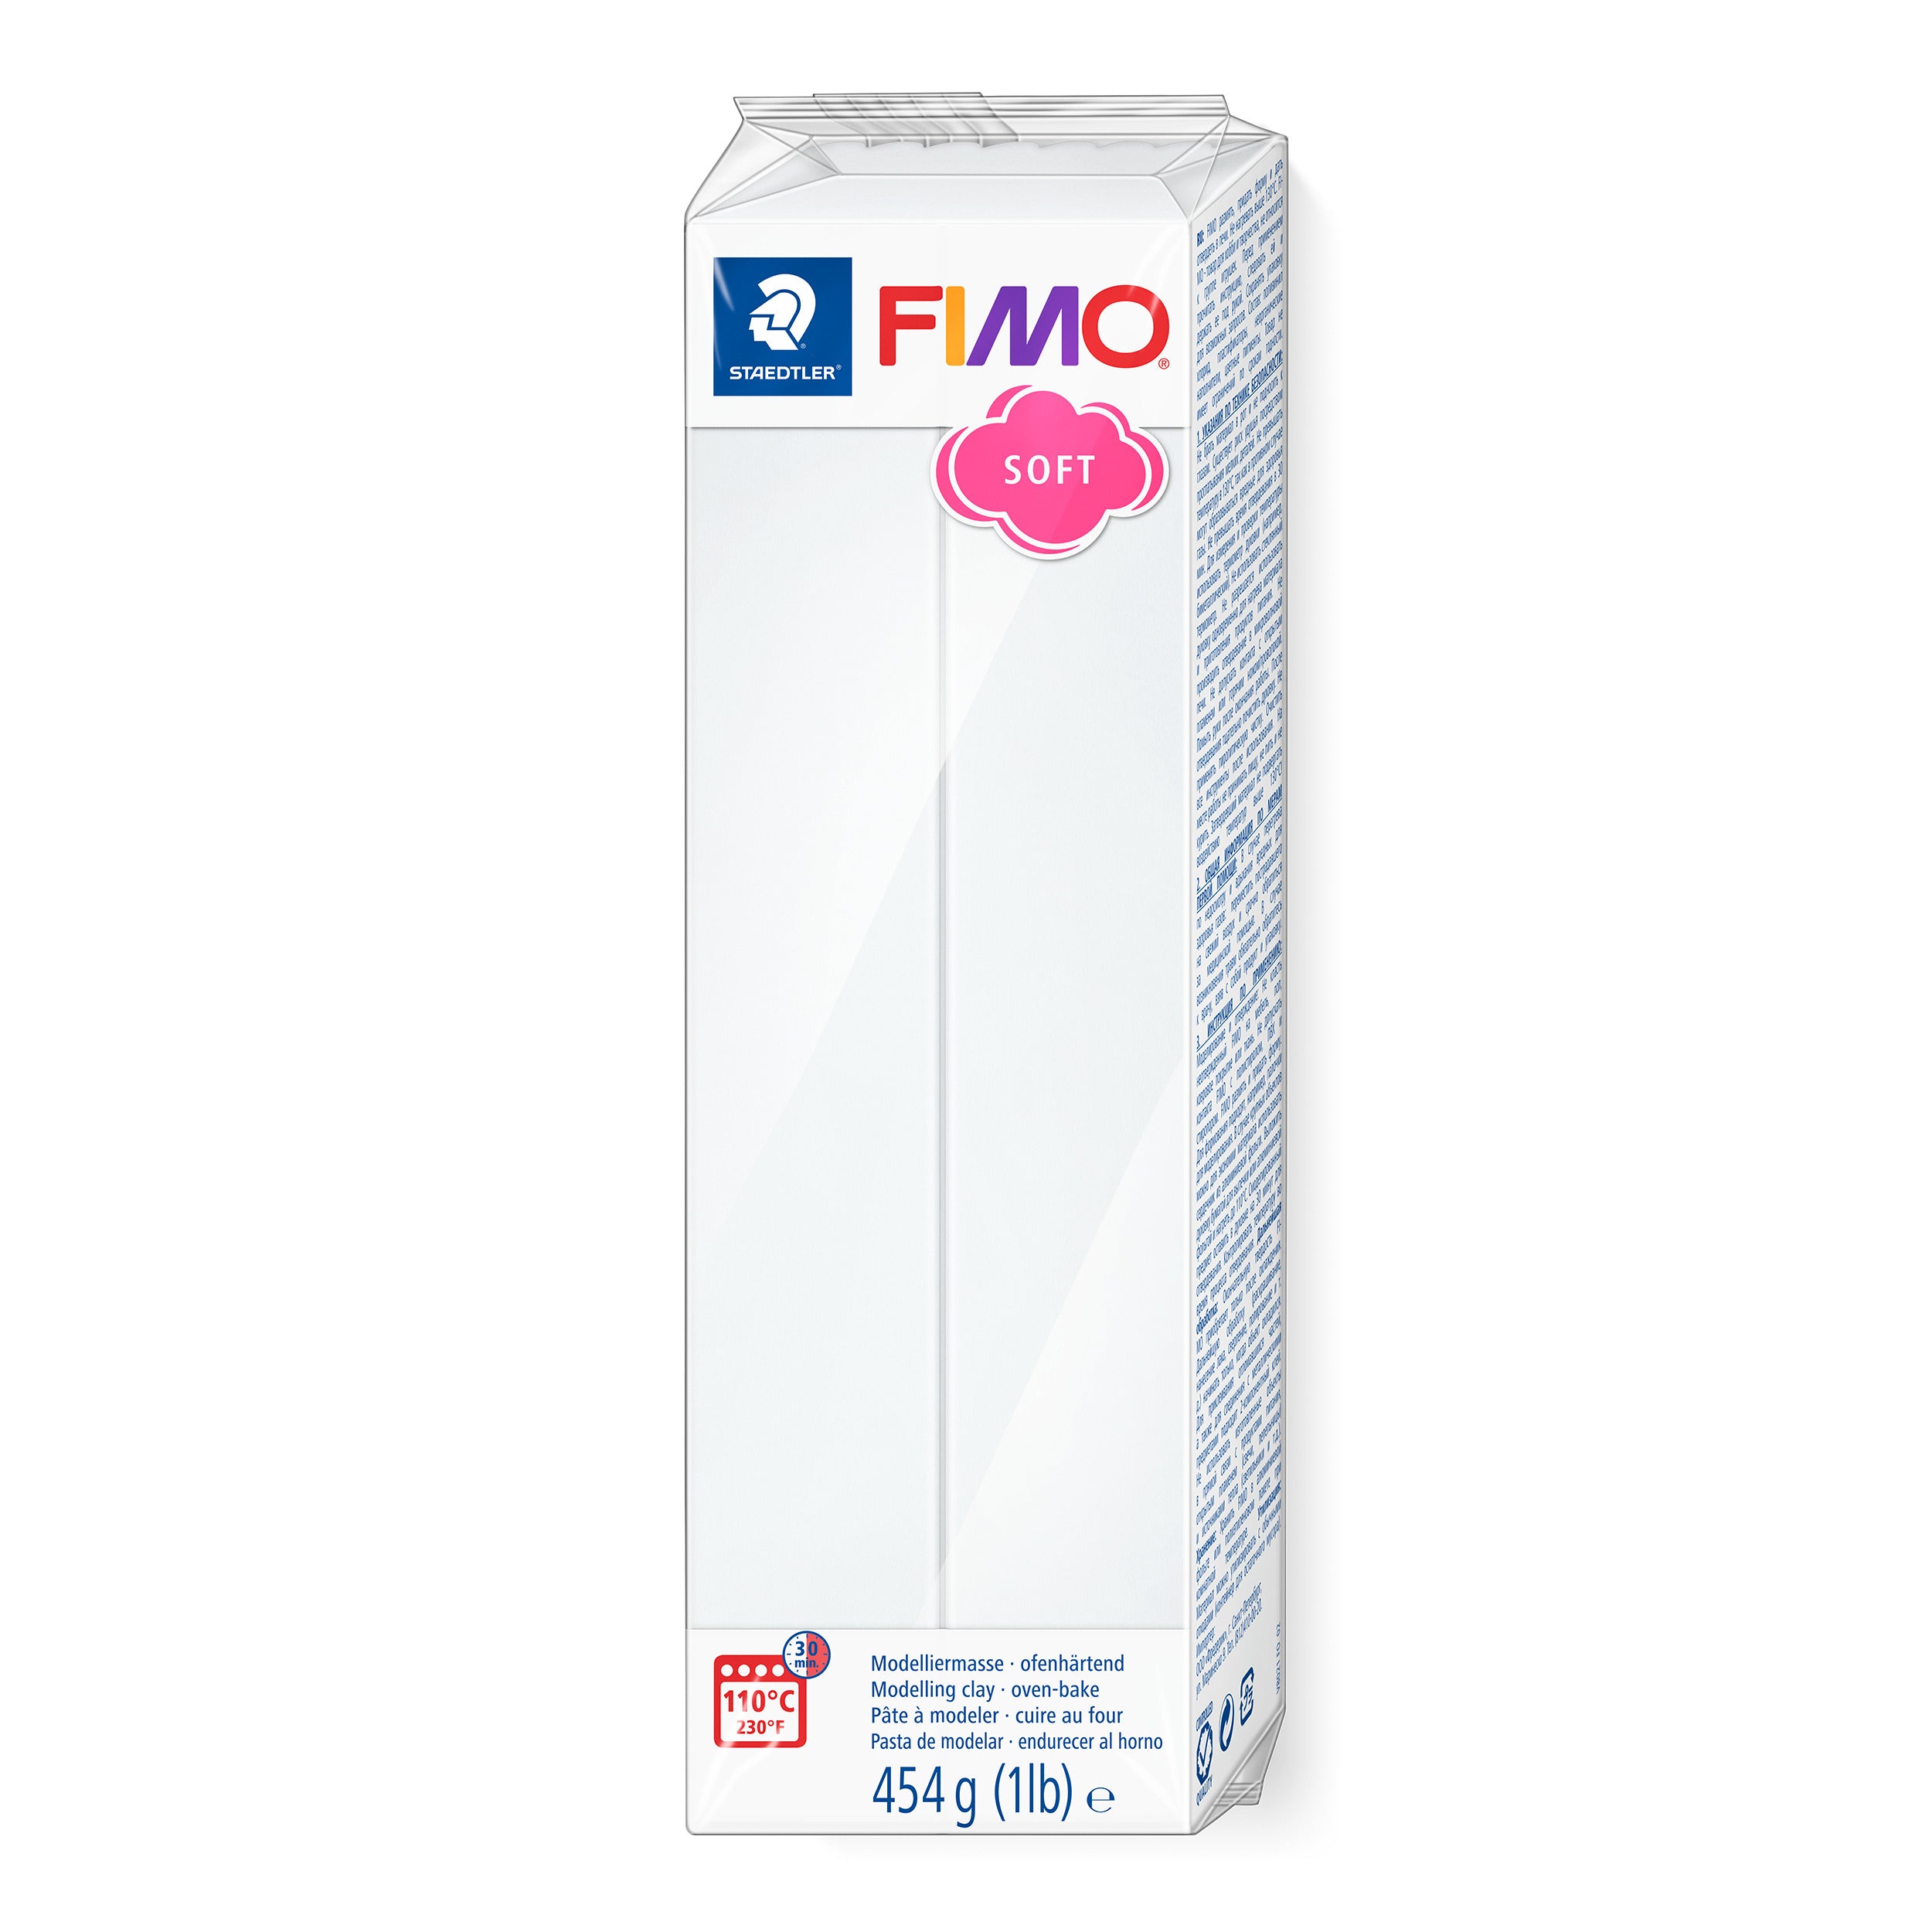 Fimo Soft Polymer Clay Large Block 454g (1lb) - White